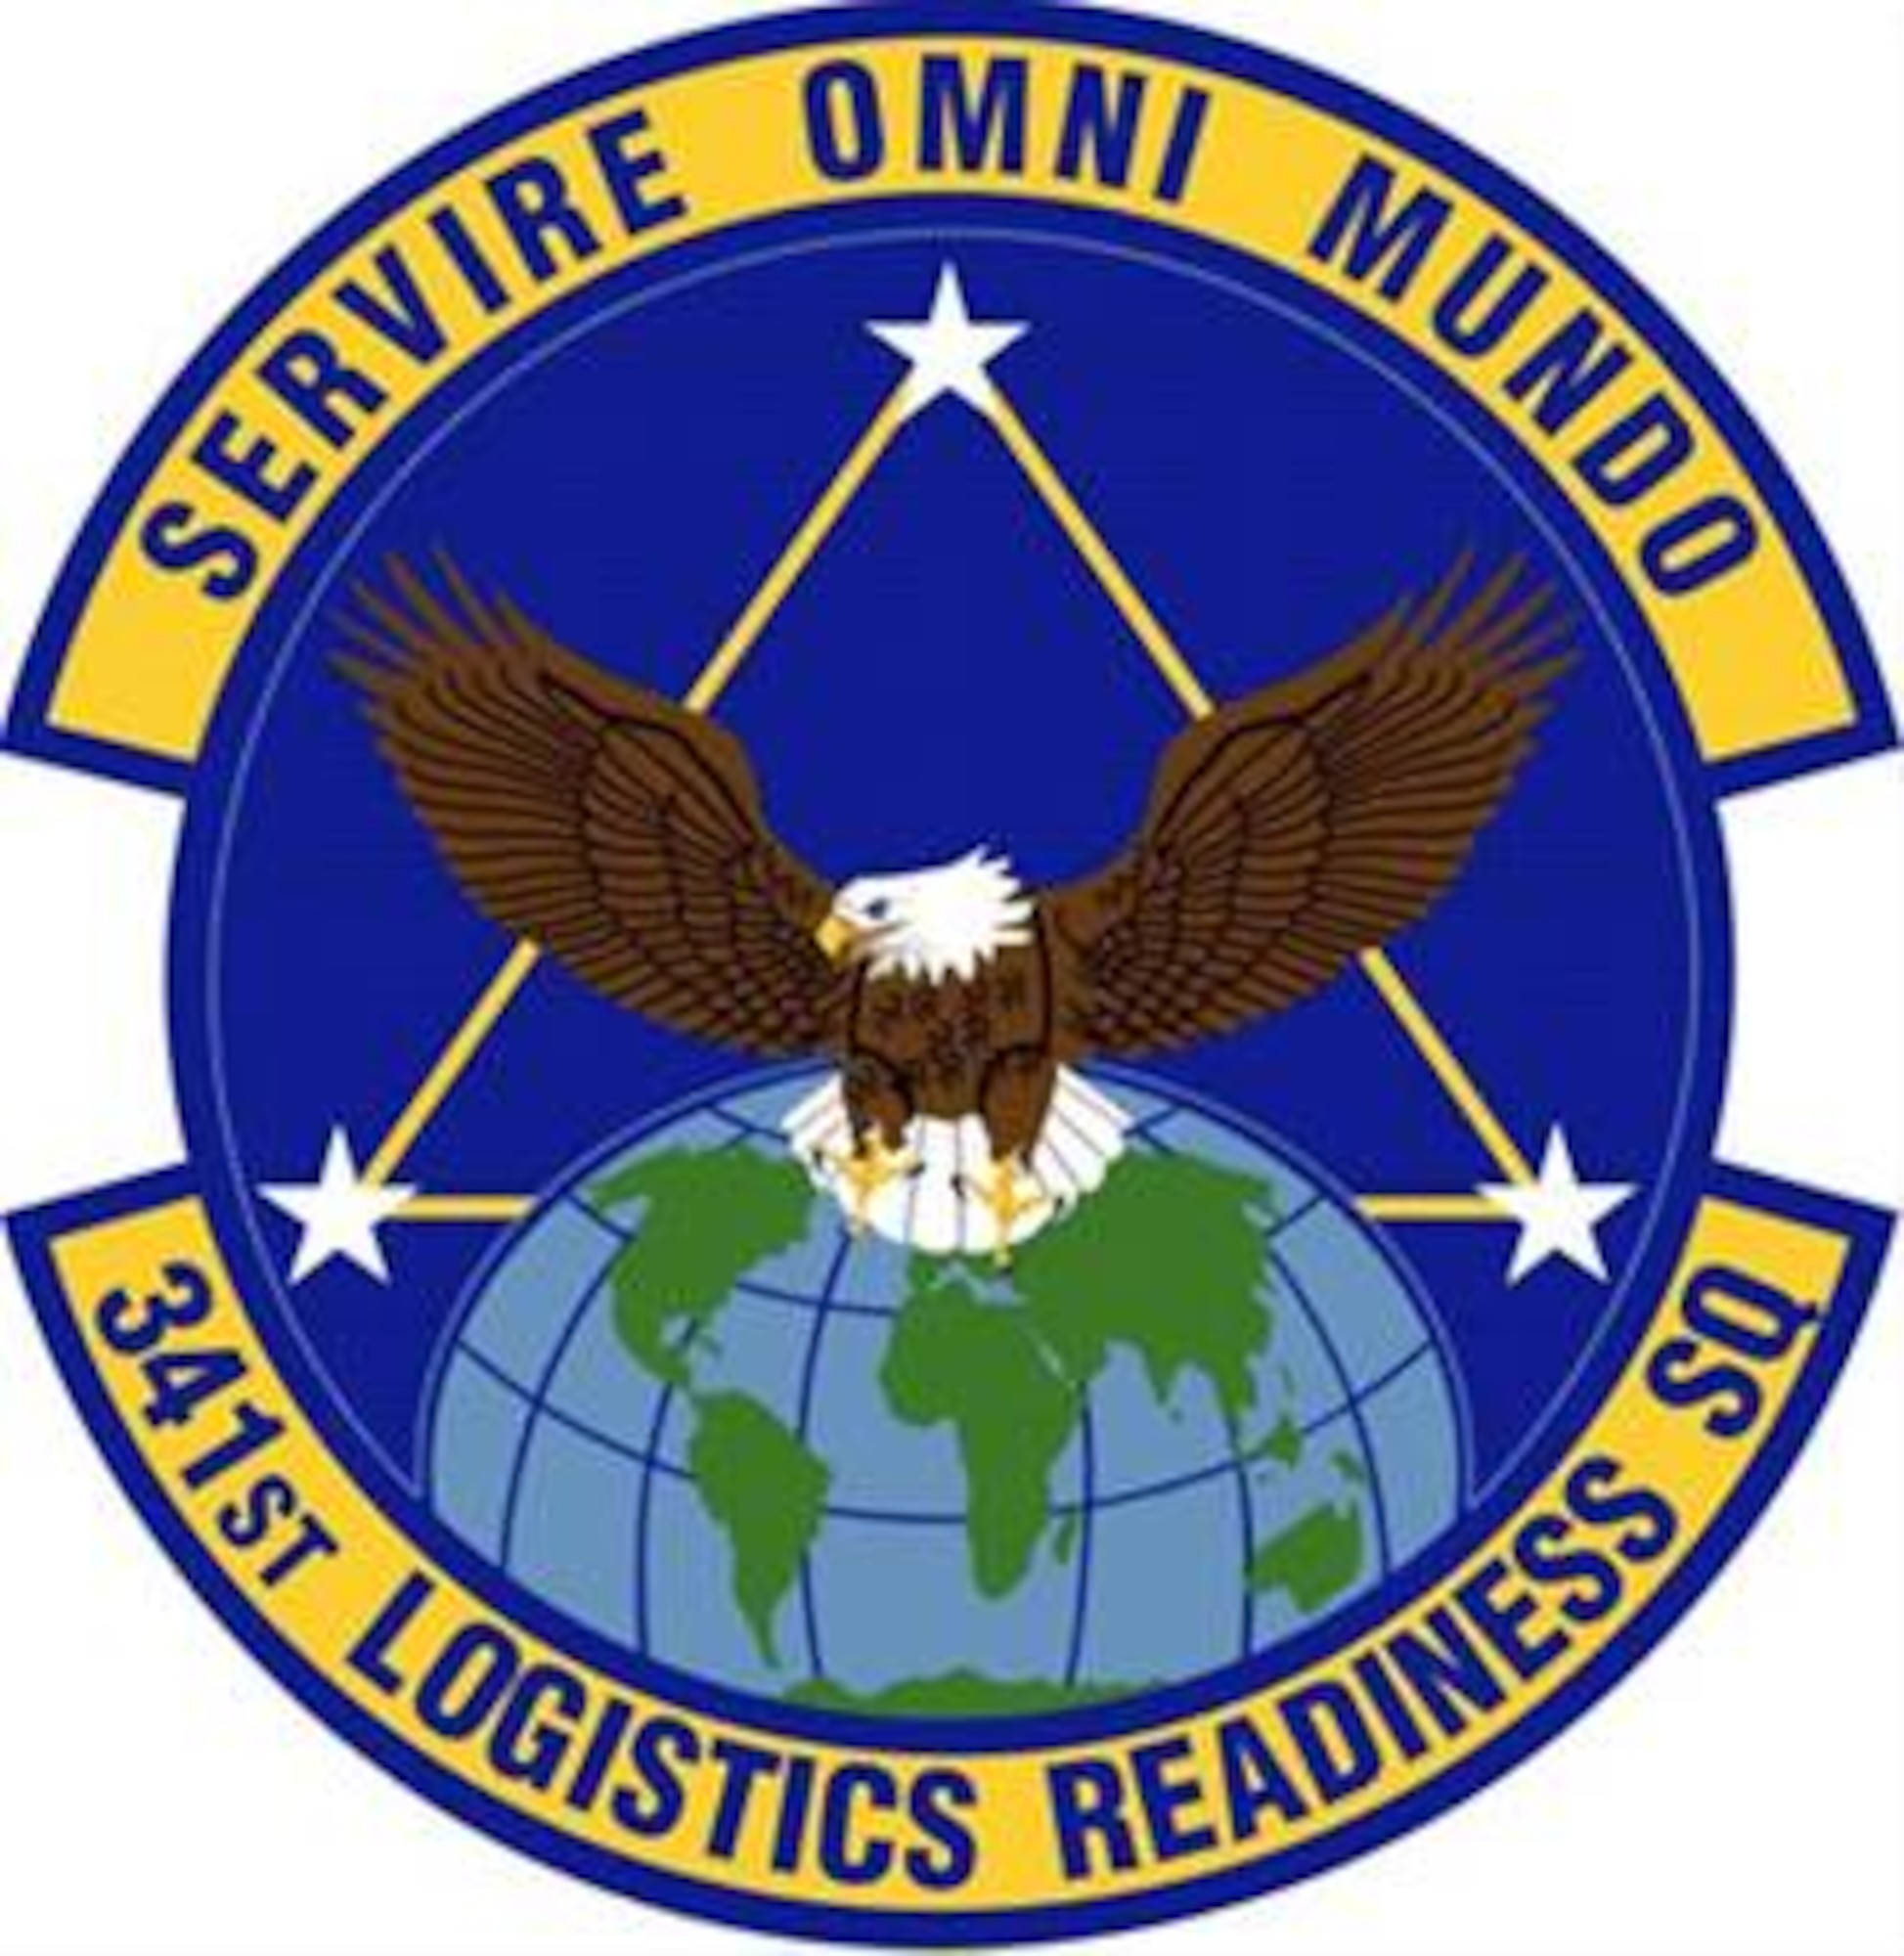 The 341st Logistics Readiness Squadron was recognized as the Air Force 2018 non-flying Logistics Readiness Squadron of the Year.